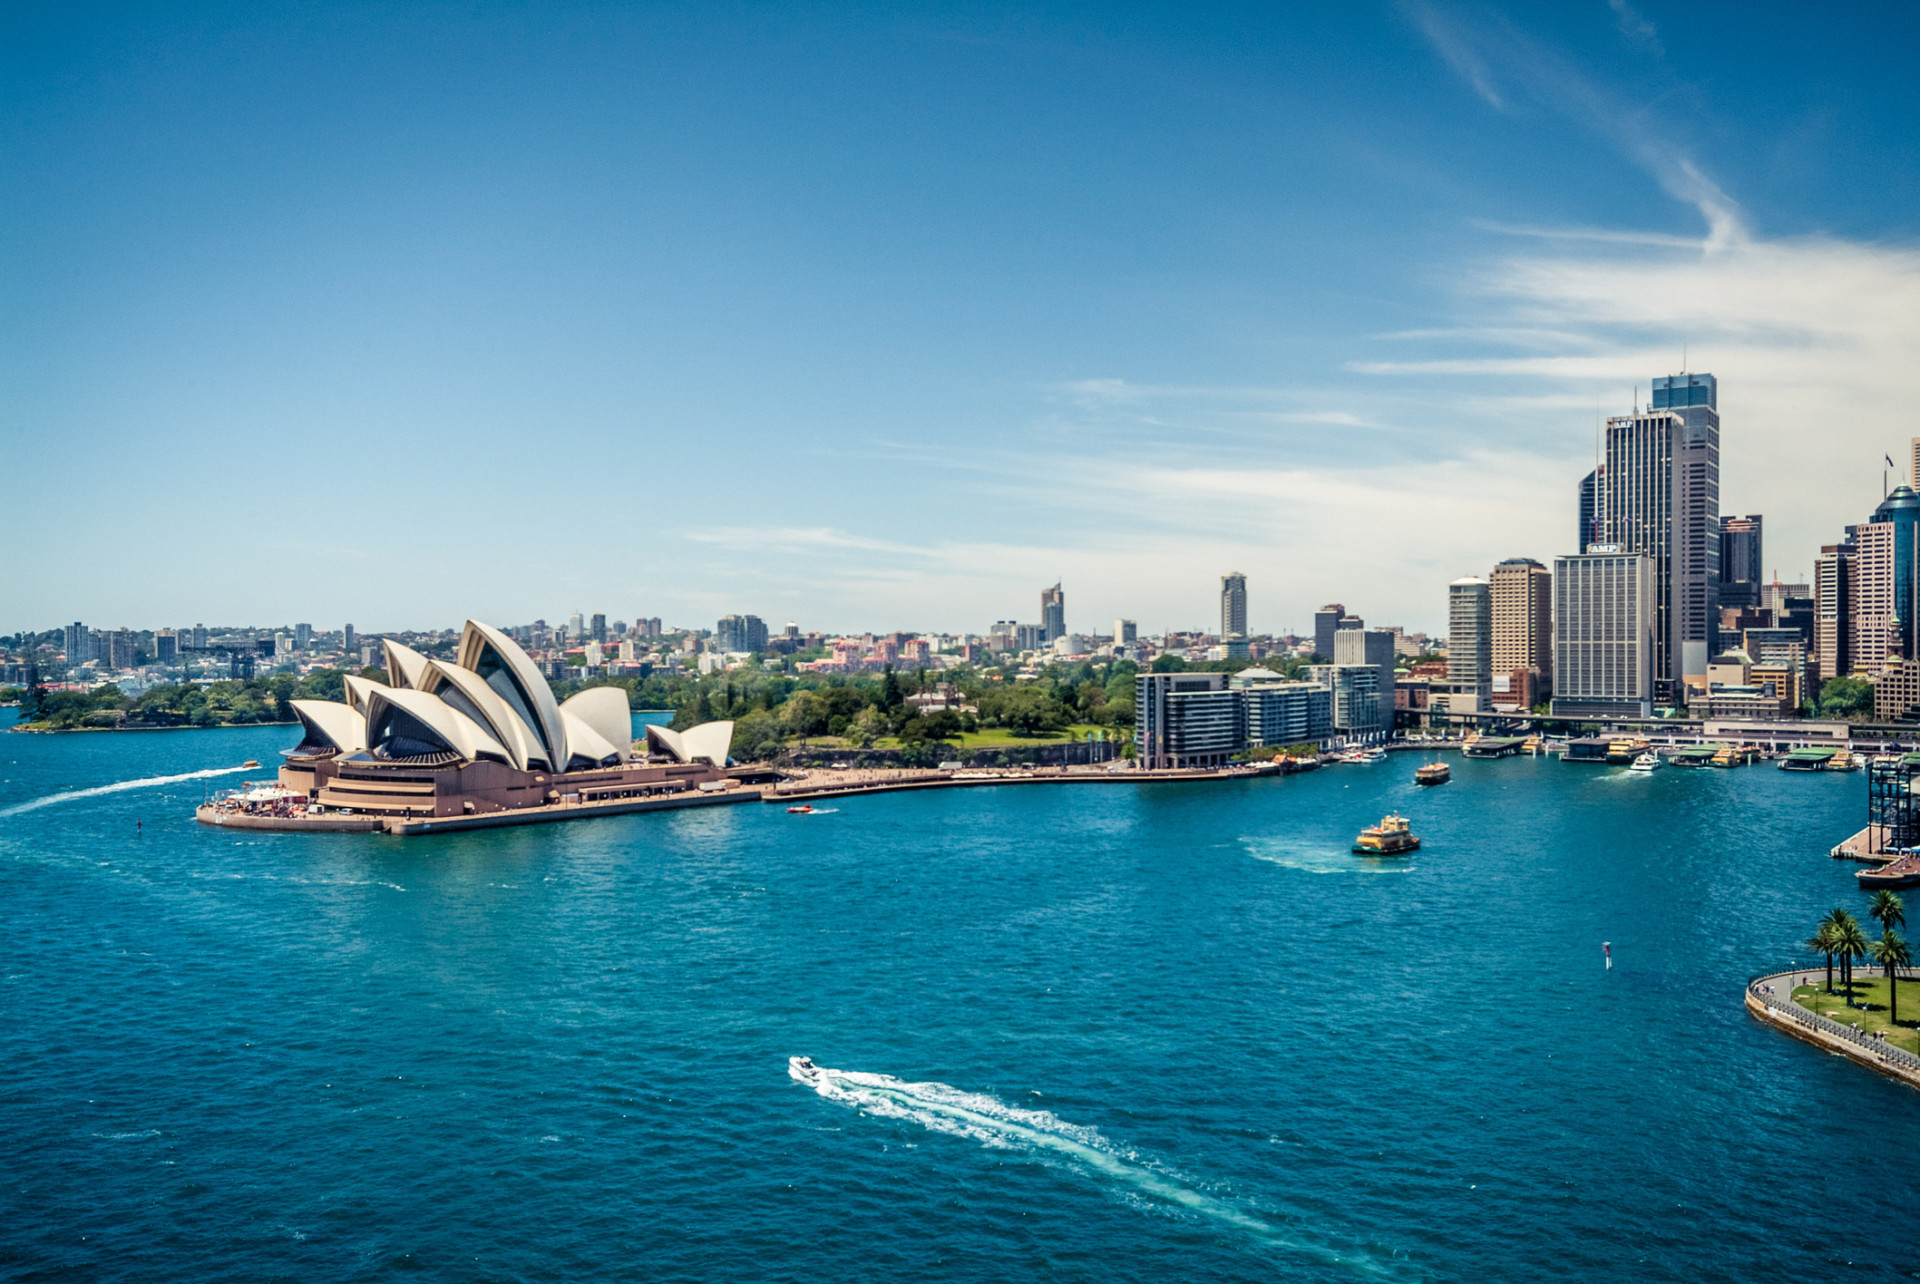 There are so many things happening in Sydney that it's almost impossible to keep up. Highlights include exploring the Sydney Harbour or surfing at the popular Bondi beach.<p>You may also like:<a href="https://www.starsinsider.com/n/442525?utm_source=msn.com&utm_medium=display&utm_campaign=referral_description&utm_content=284295v5en-nz"> Everyday things you didn’t realize are harming your mental health</a></p>